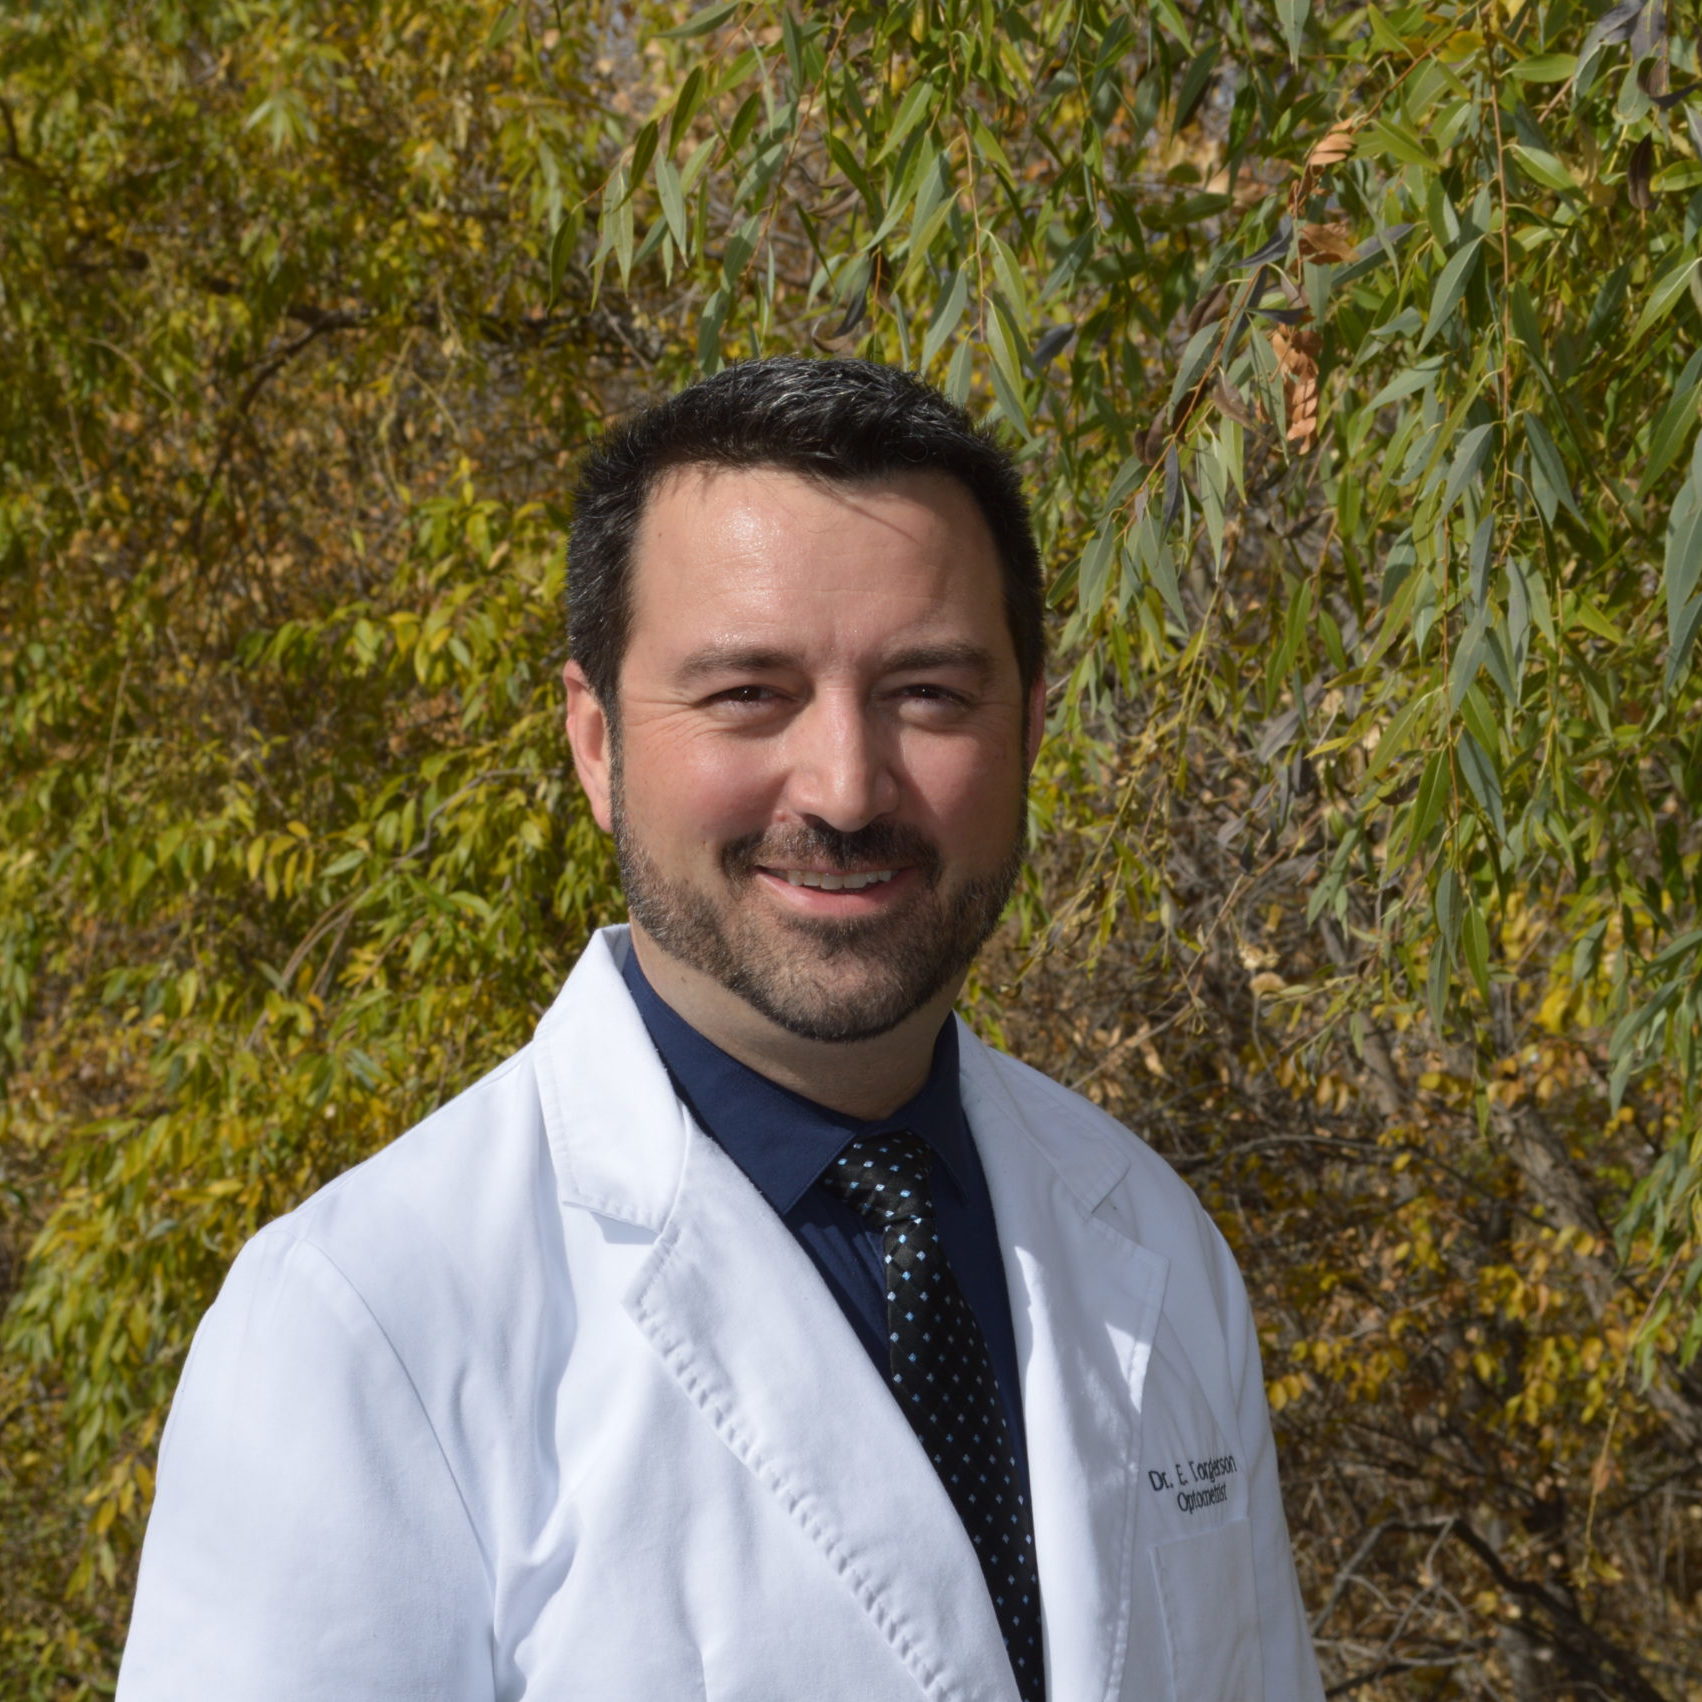 Dr. Eric Torgerson grew up in Fort Collins and completed his undergraduate studies at Colorado State University.  He completed his Bachelors of Science in Biological Sciences with a minor in Anatomy and Neurobiology in 2003.  He then went on to obtain his Doctorate of Optometry at Pacific University College of Optometry and graduated with distinction in 2007.